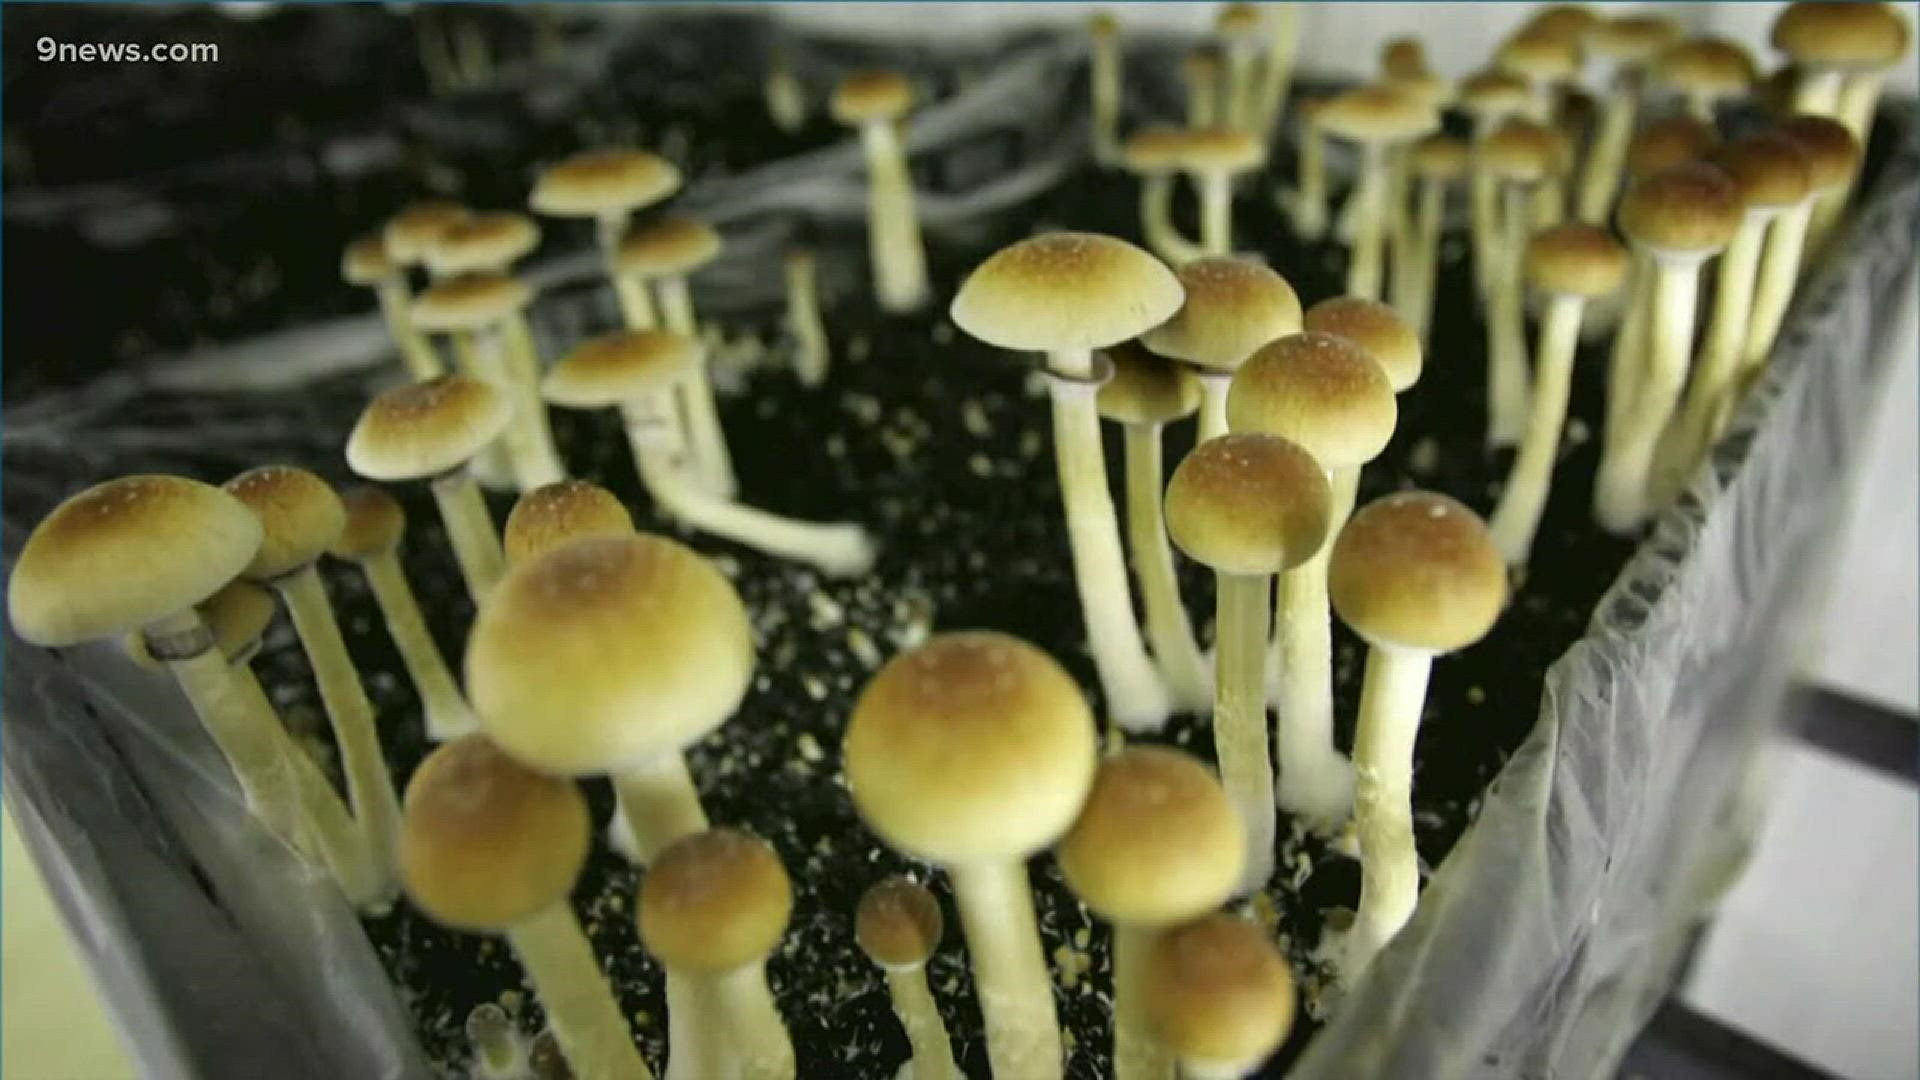 Denver Elections announced on Friday that an initiative to decriminalize psychedelic mushrooms in Denver has earned enough signatures to appear on the May ballot.